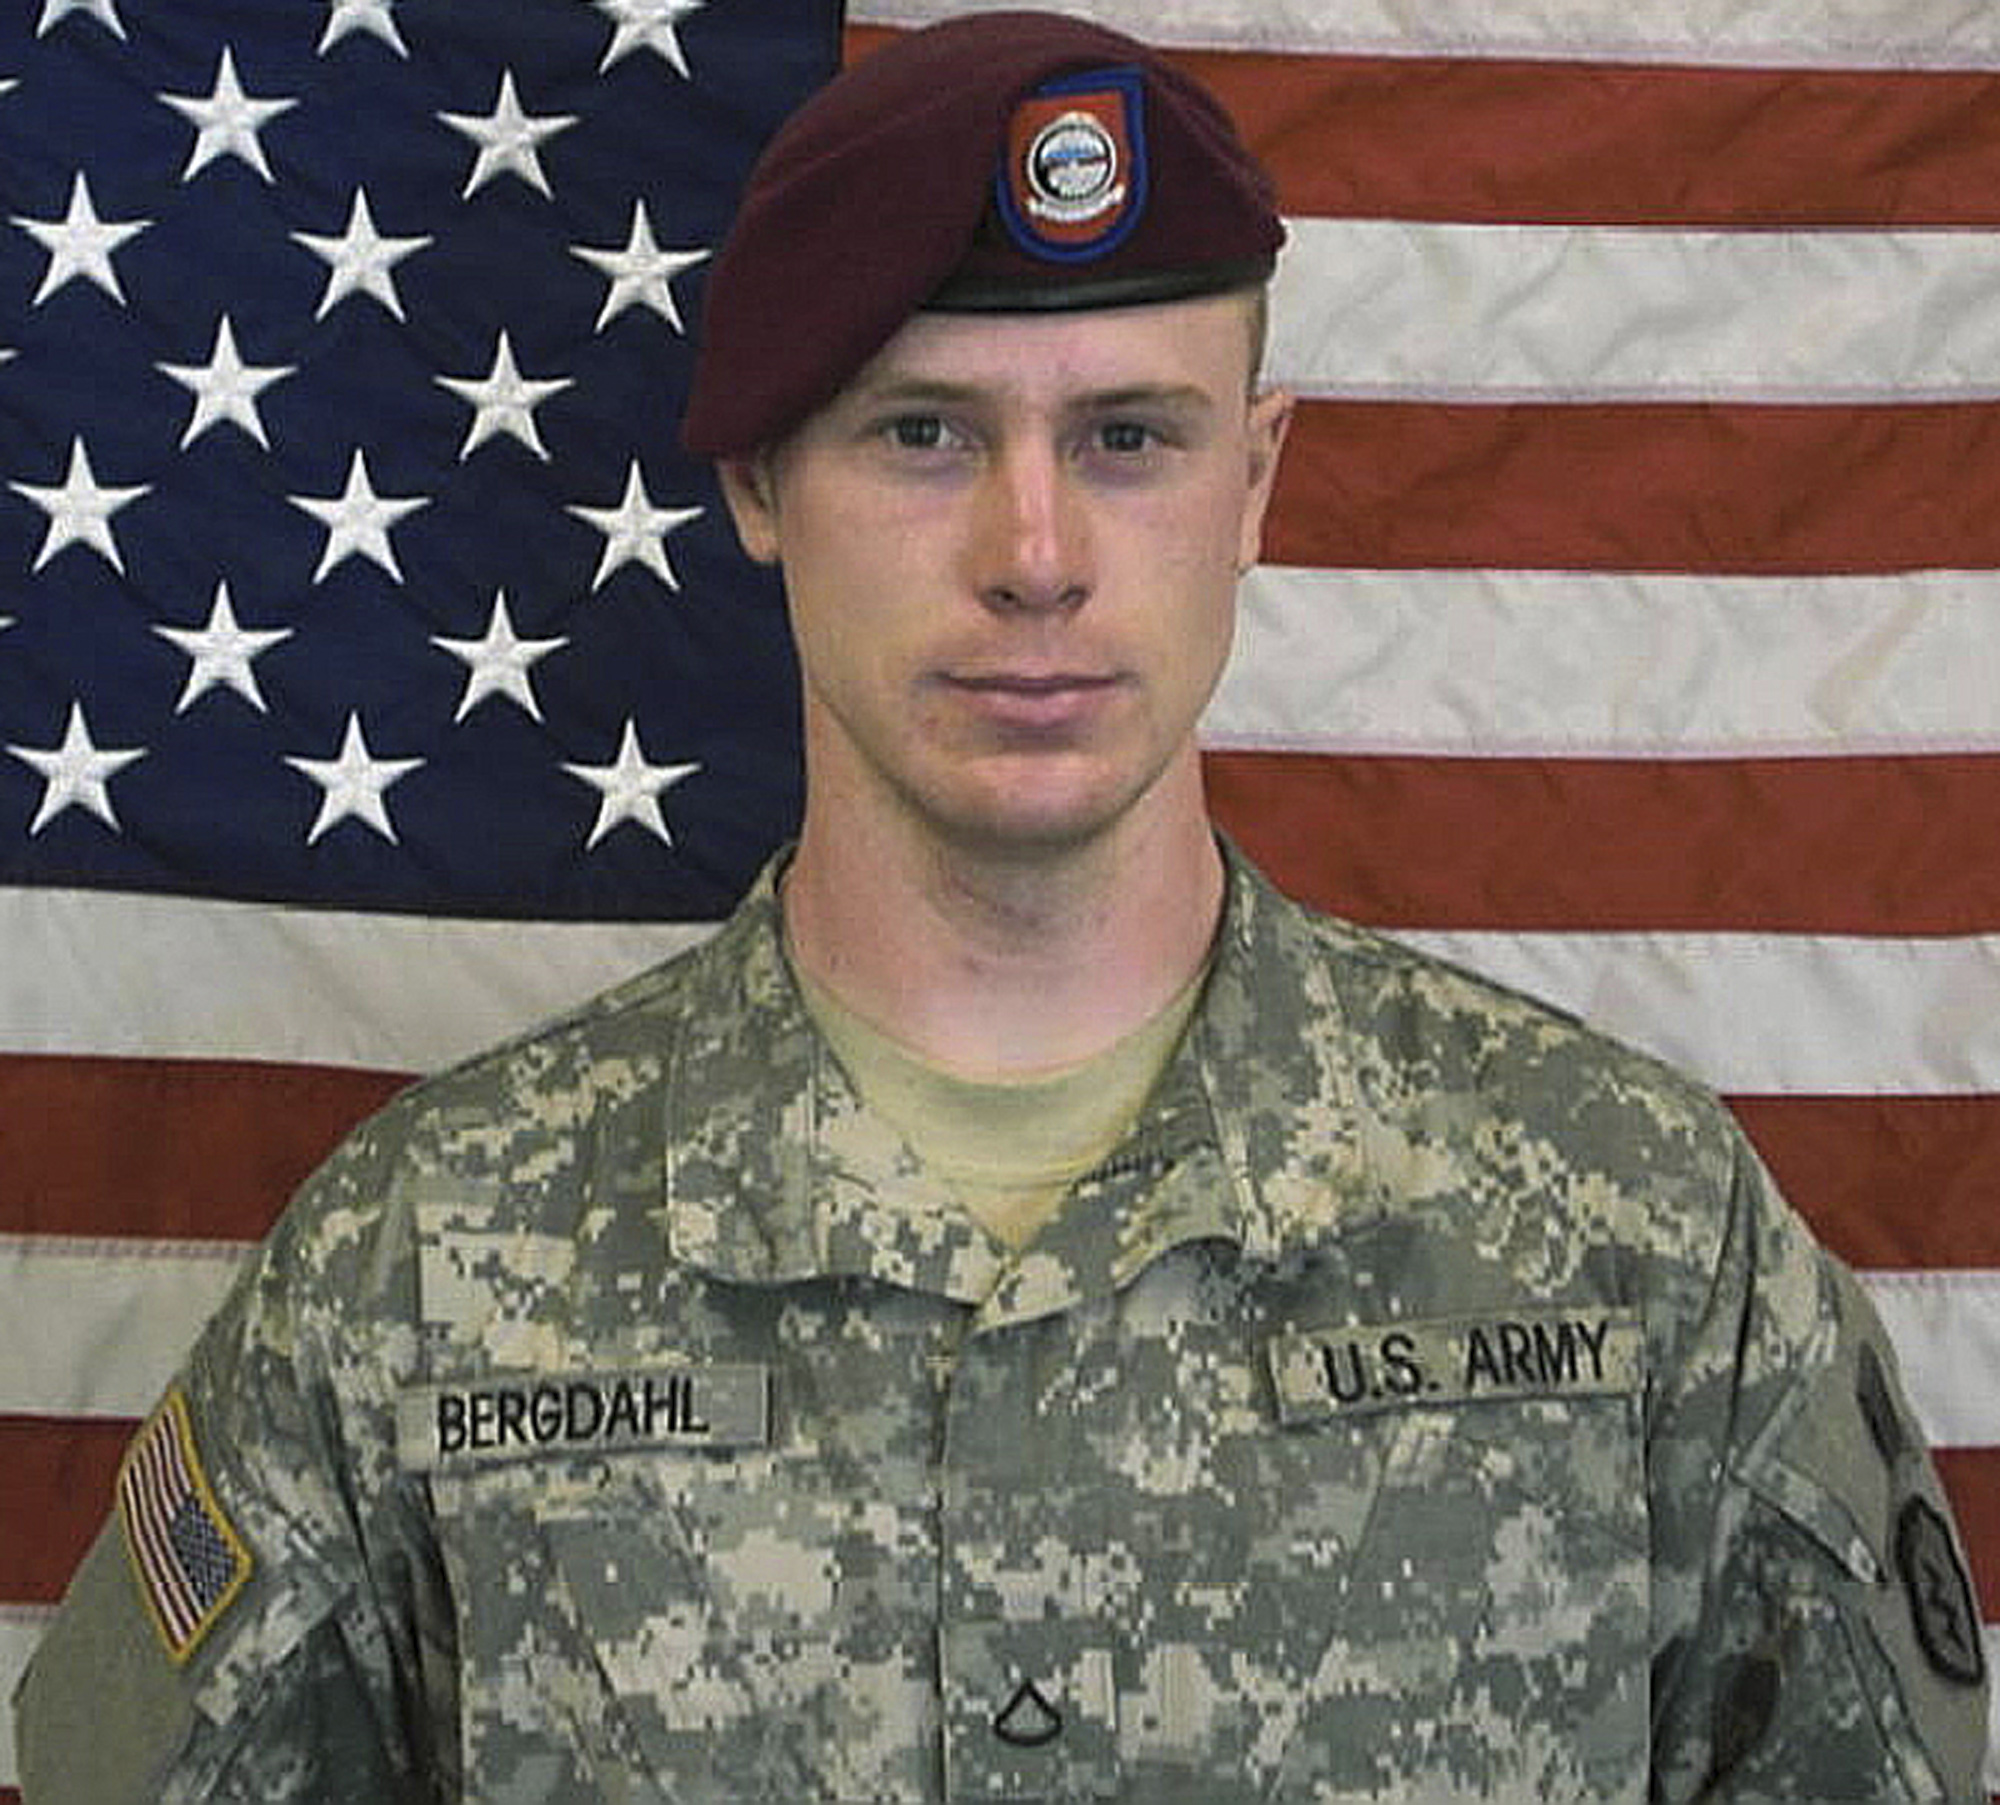 This undated photo provided by the U.S. Army shows Sergeant Bowe Bergdahl (AP)